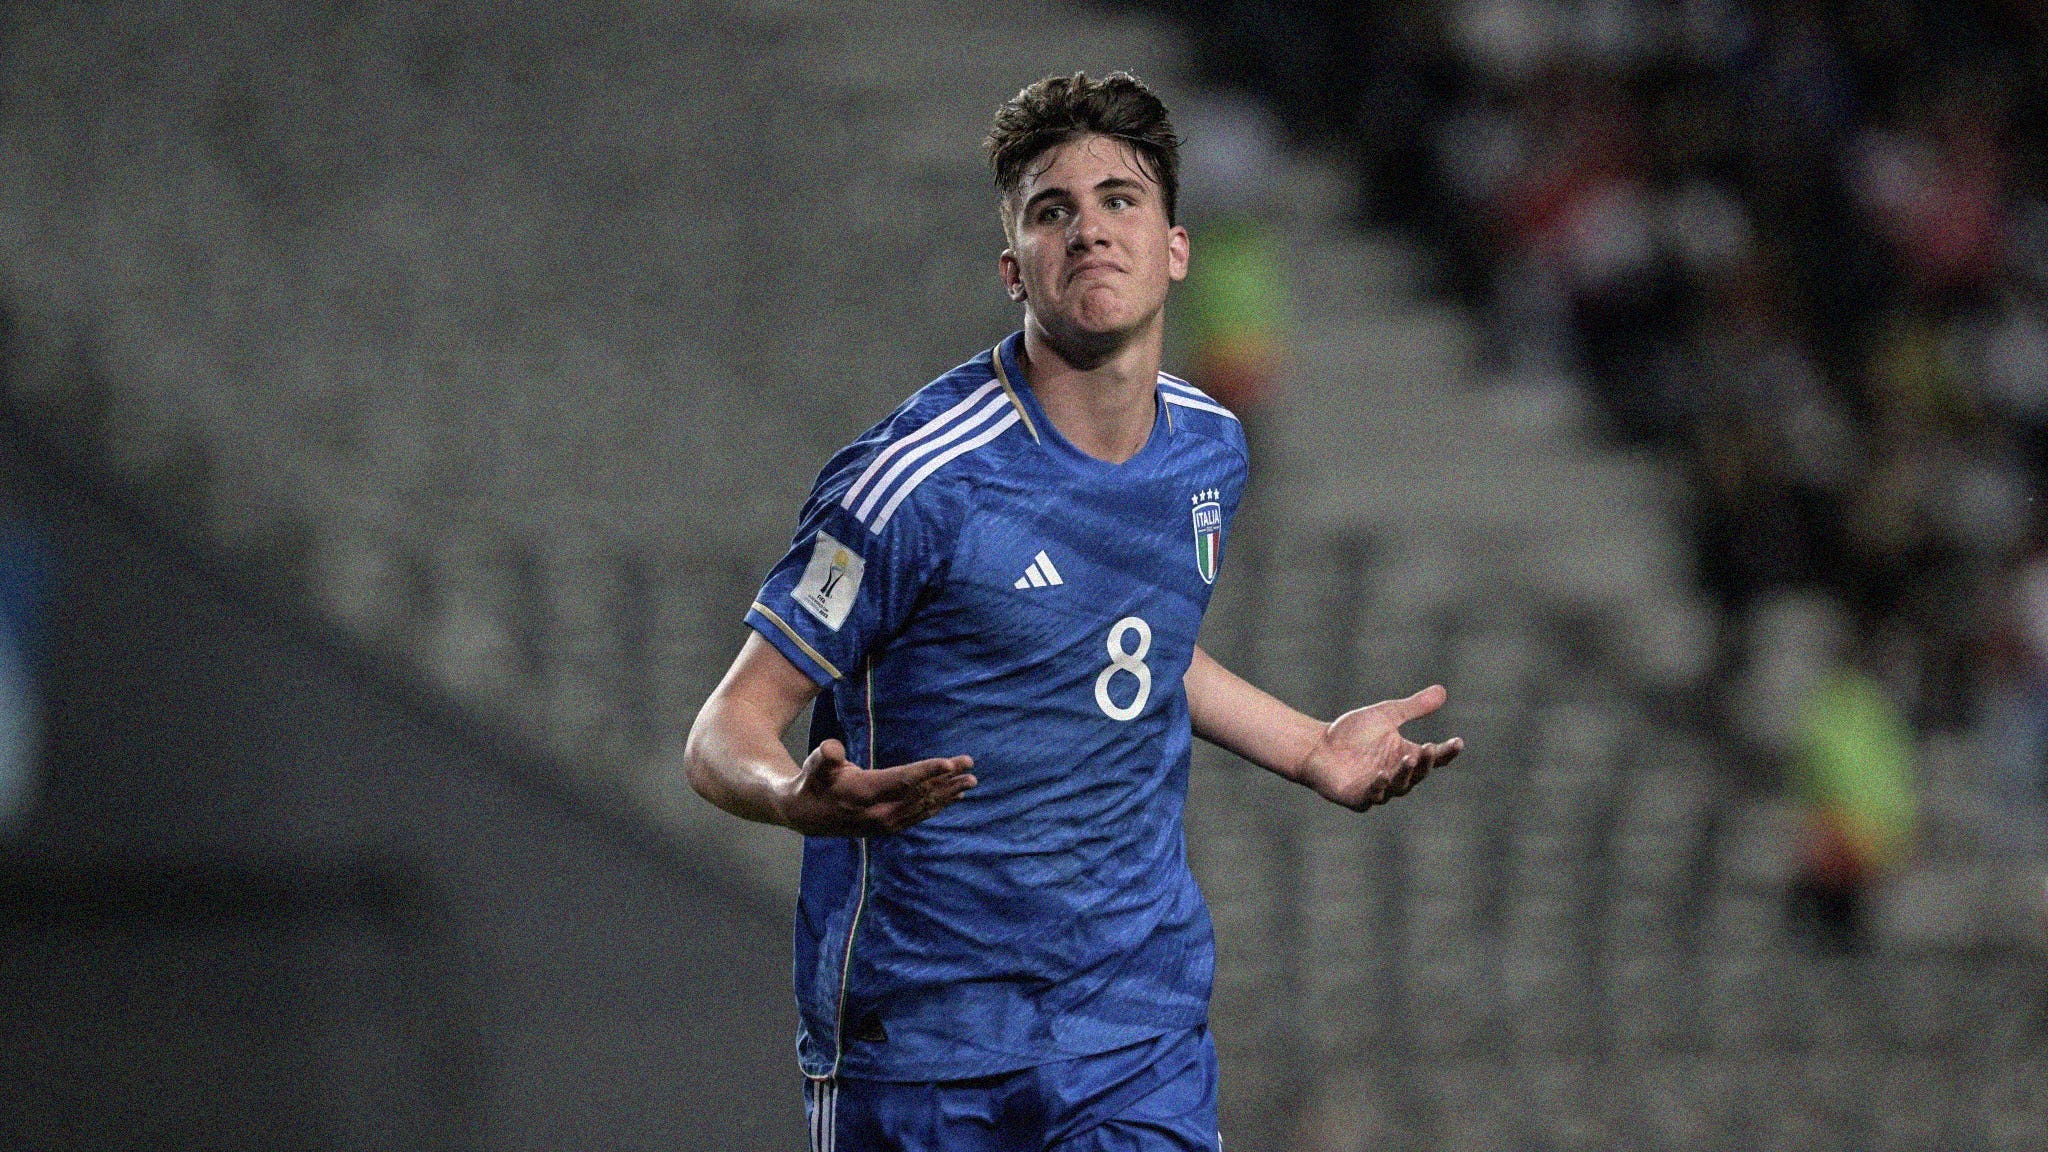 A photo of Italy's Cesare Casadei celebrating scoring a goal at the 2023 FIFA U-20 World Cup